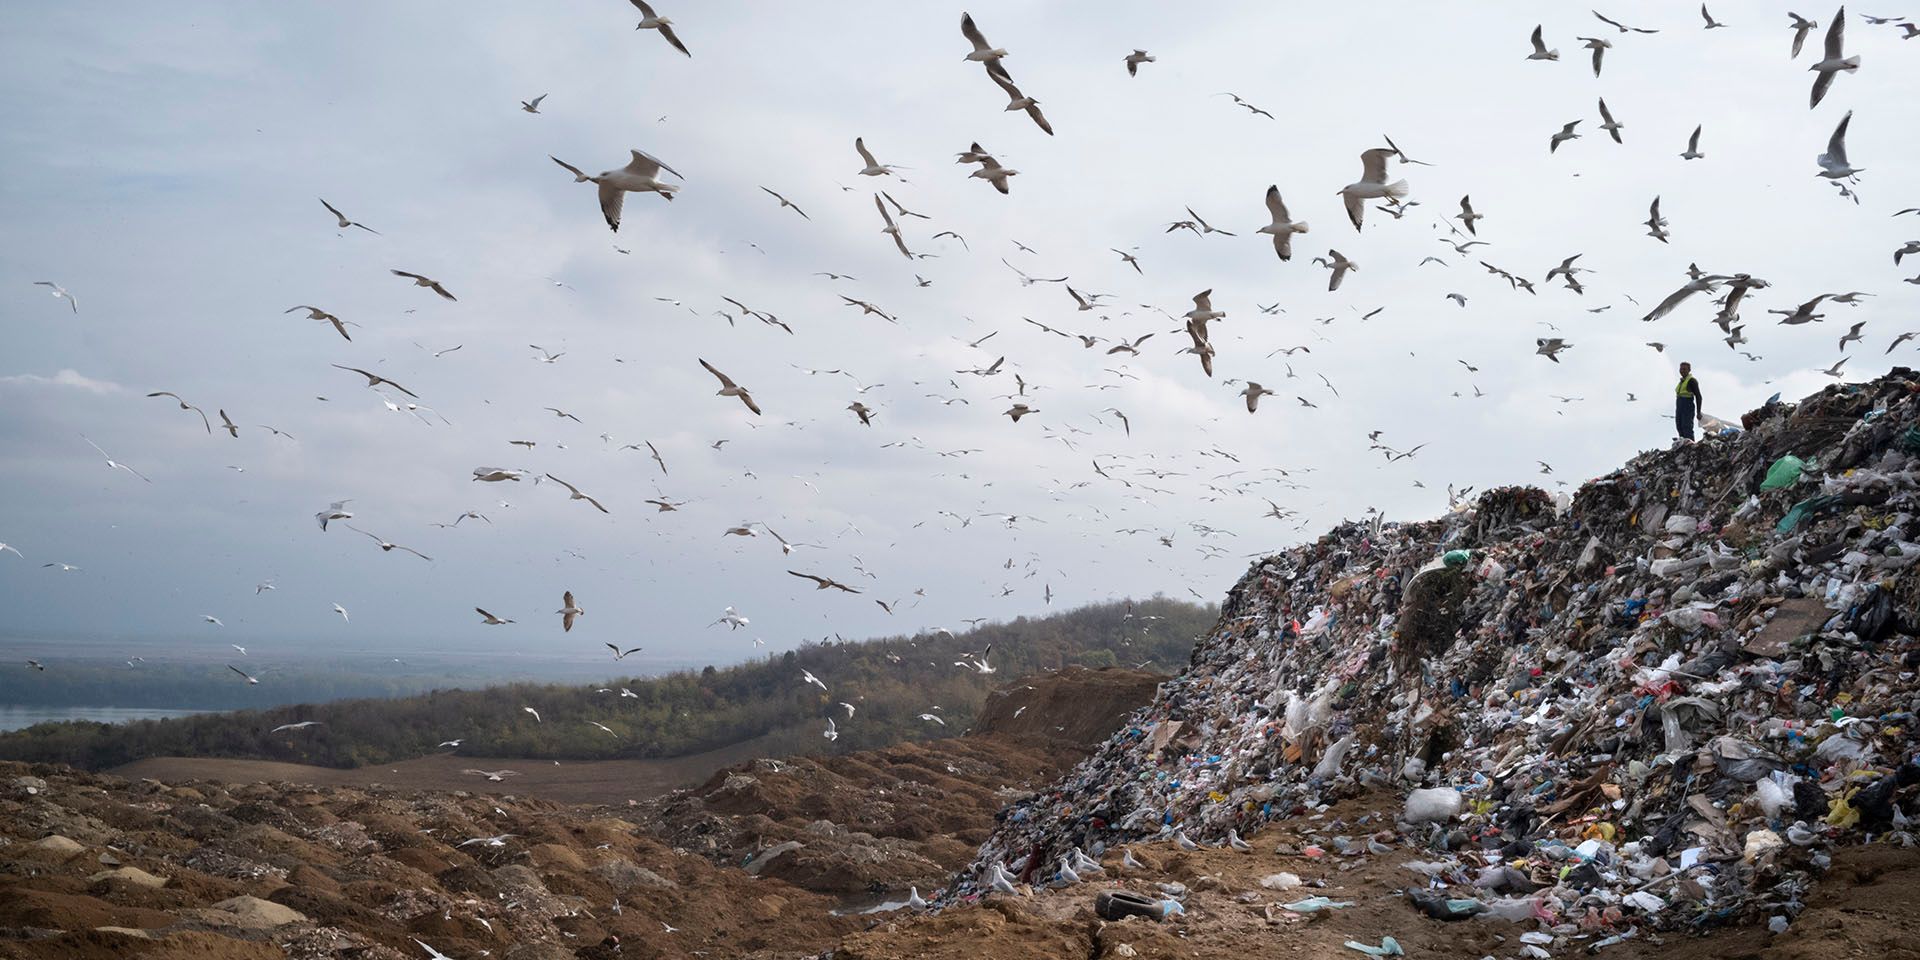 On October 31, 2019, a waste picker looks toward the Danube River while working at the Vinča Landfill in Belgrade, Serbia. The landfill’s trash is rolling toward the Danube, and is leeching toxic water into the water supply. Photo © Dominic Chavez/International Finance Corporation